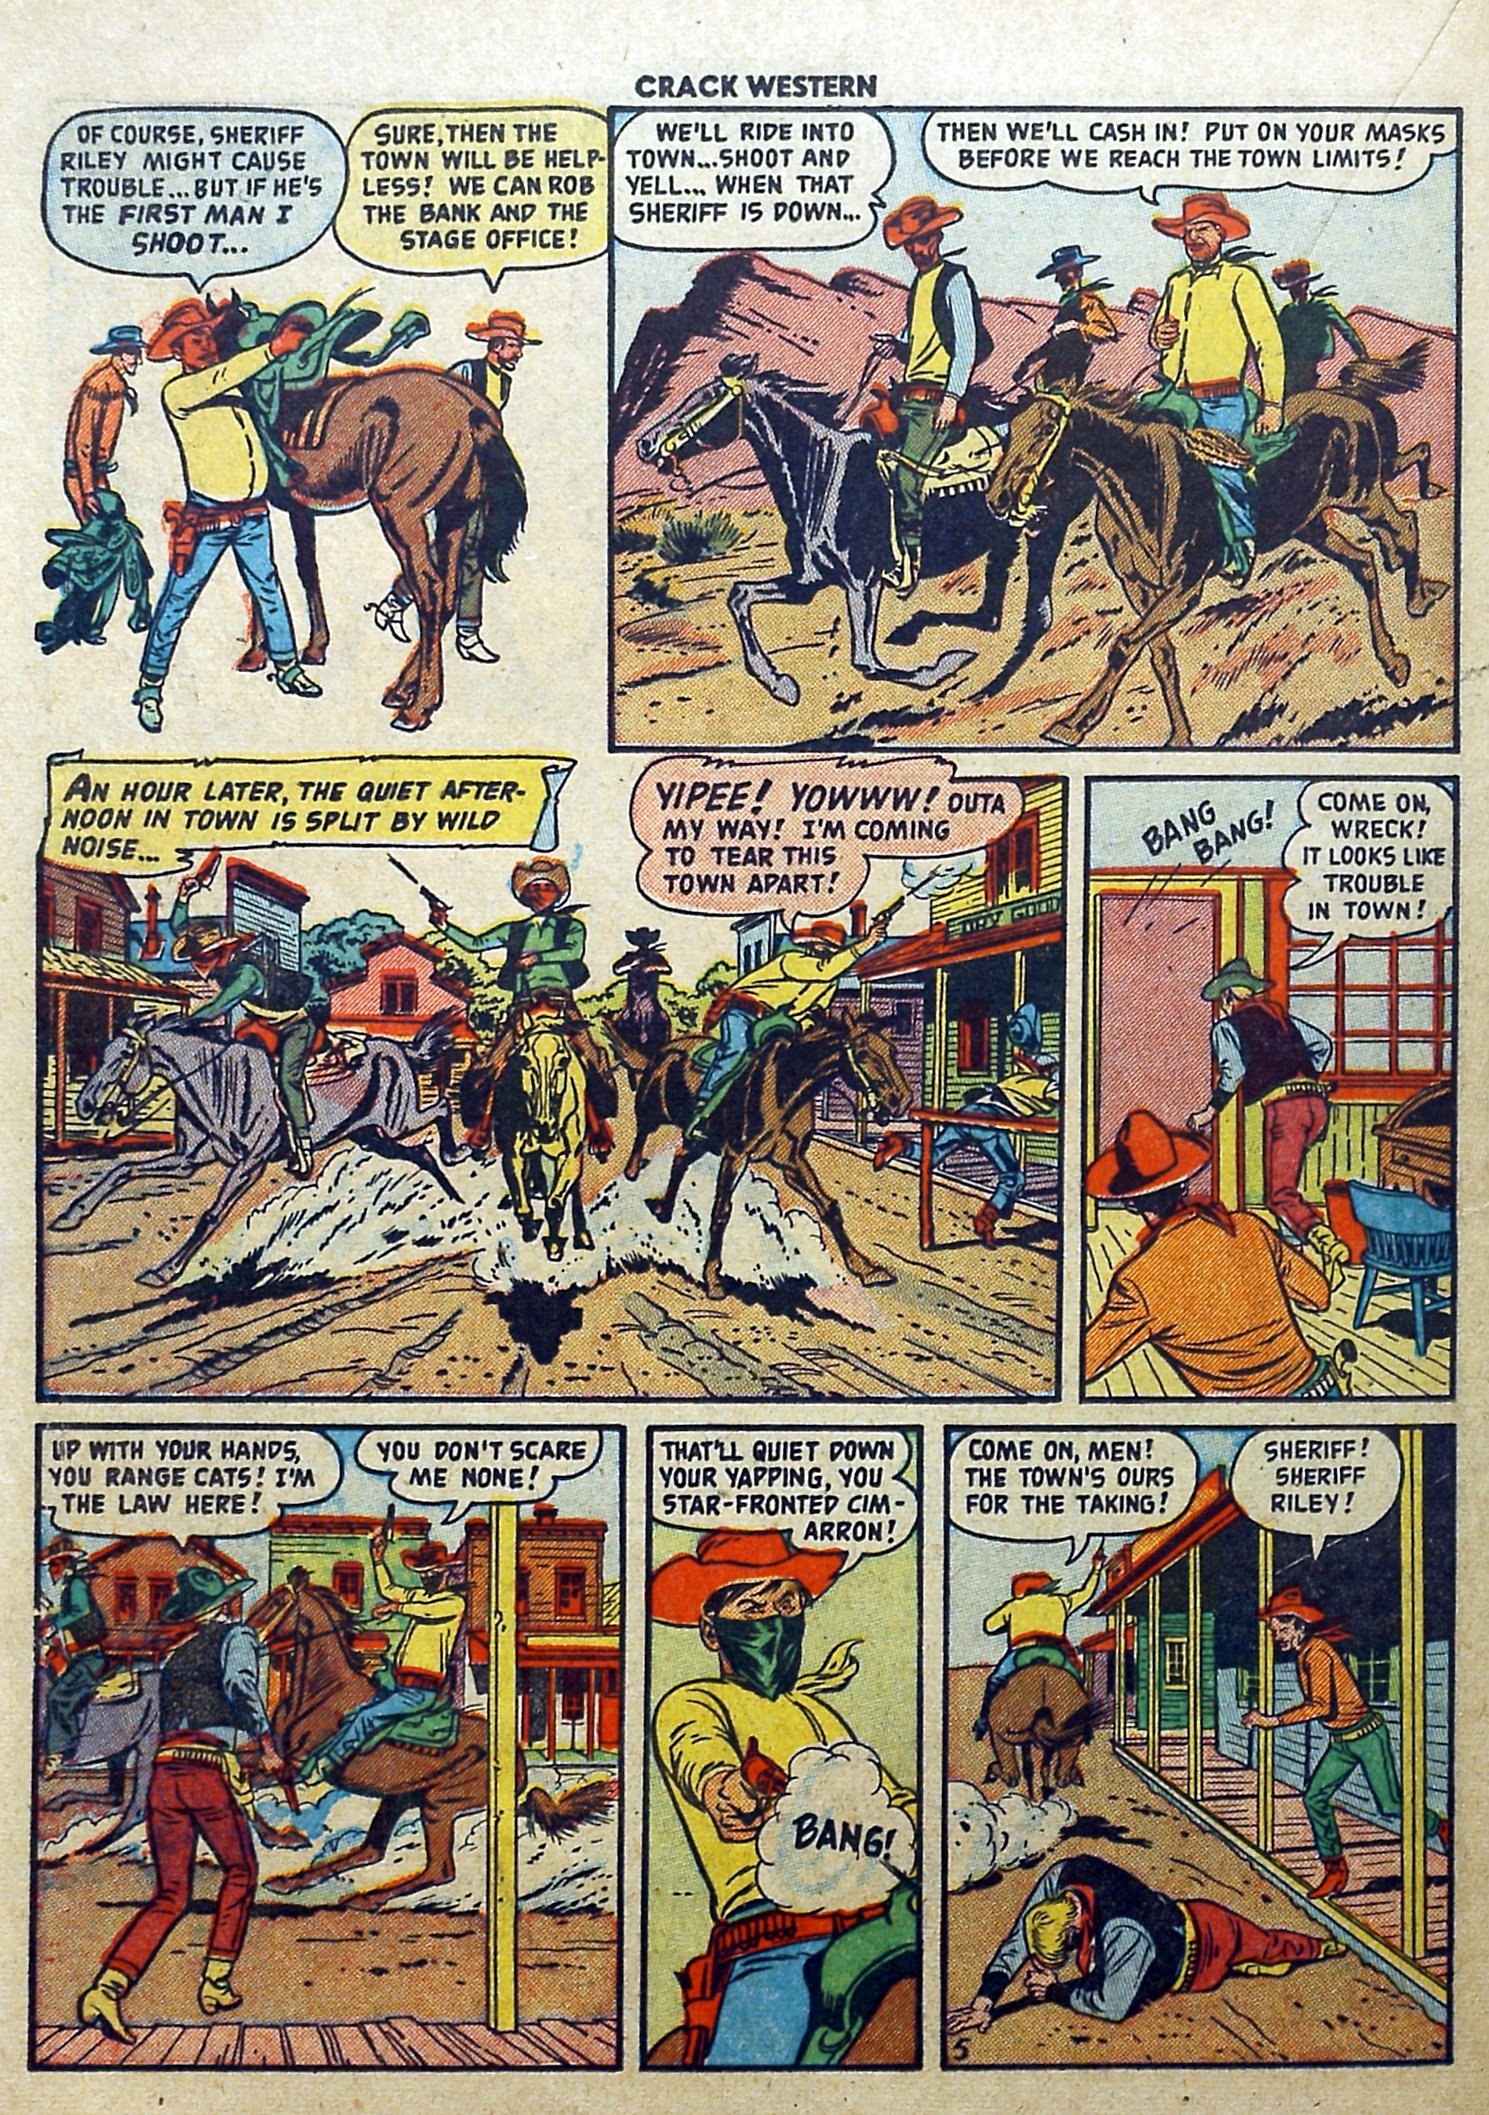 Read online Crack Western comic -  Issue #64 - 22